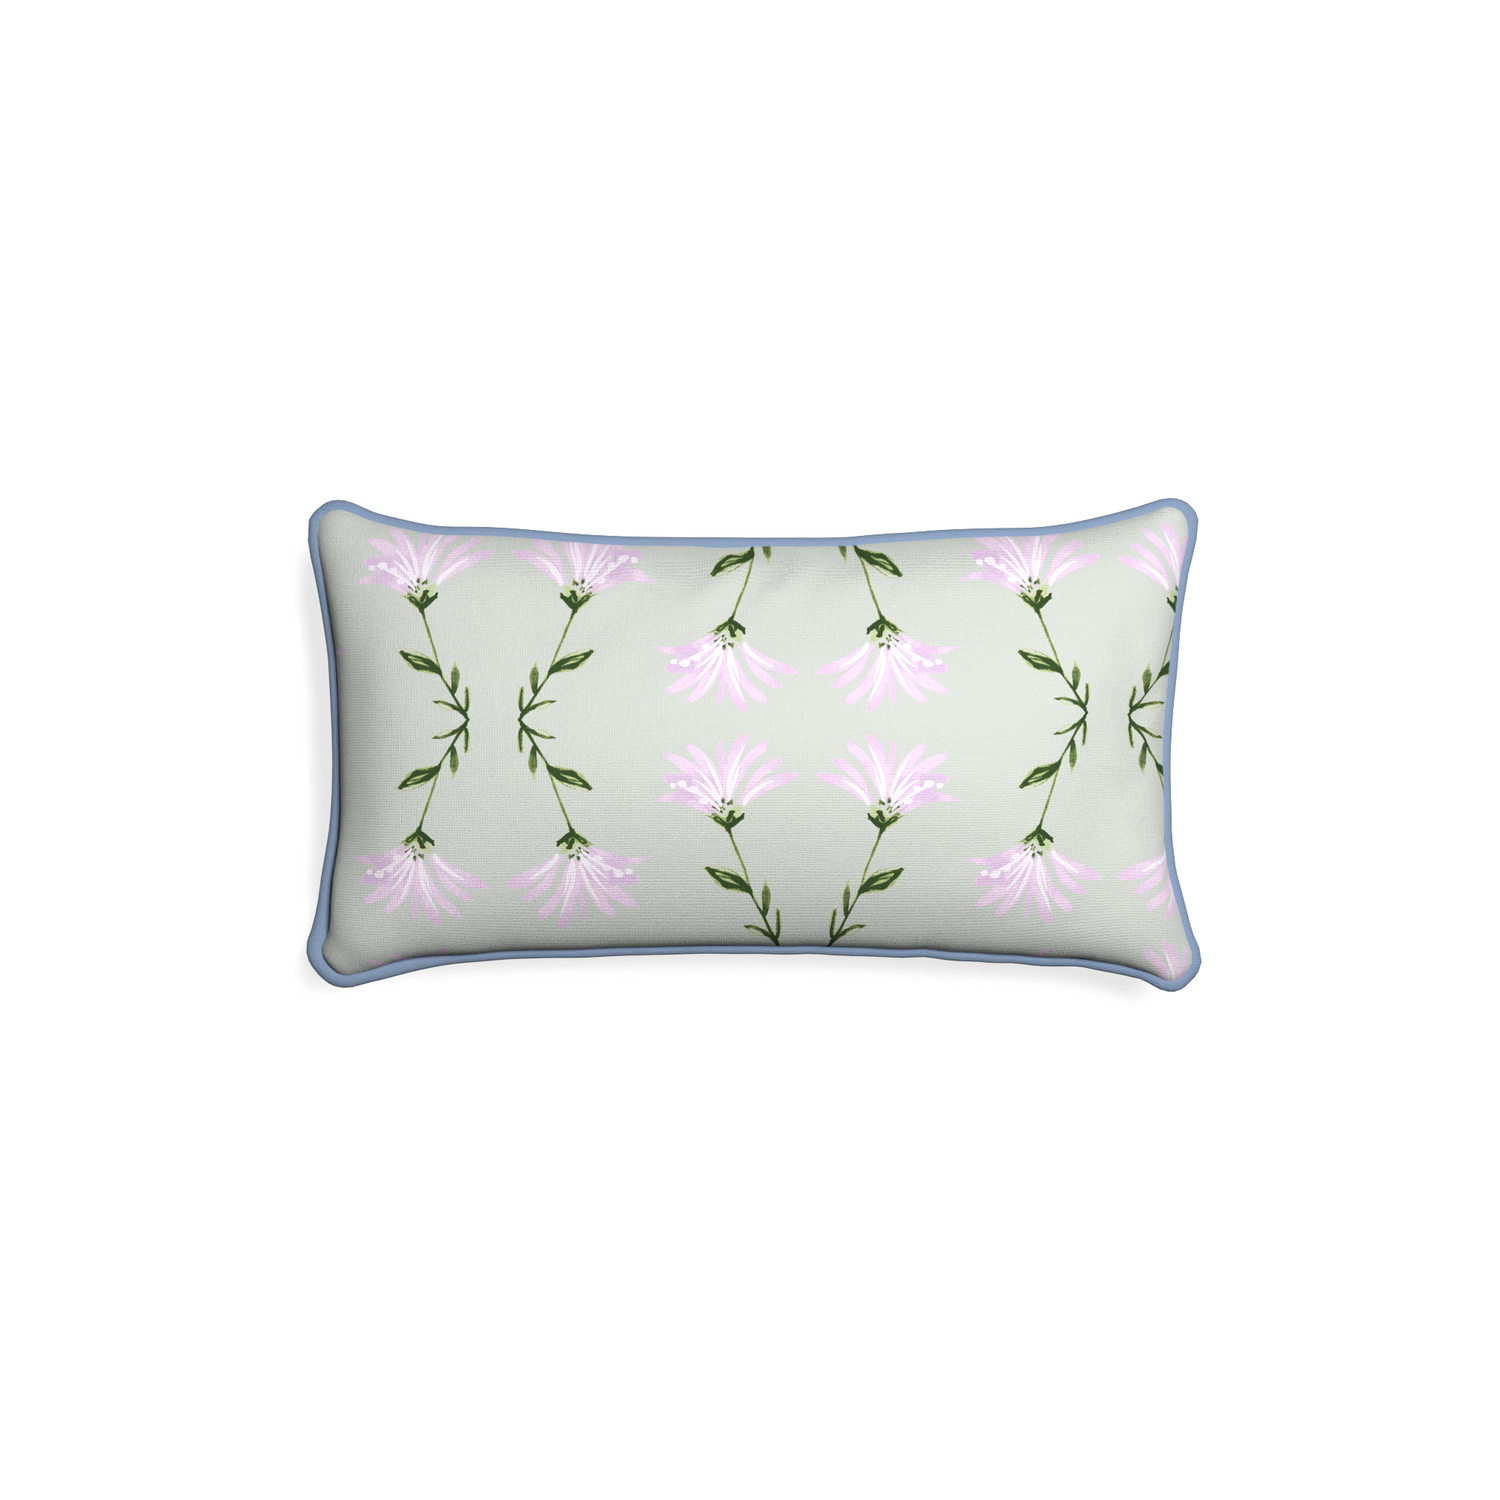 Lumbar marina sage custom pillow with sky piping on white background